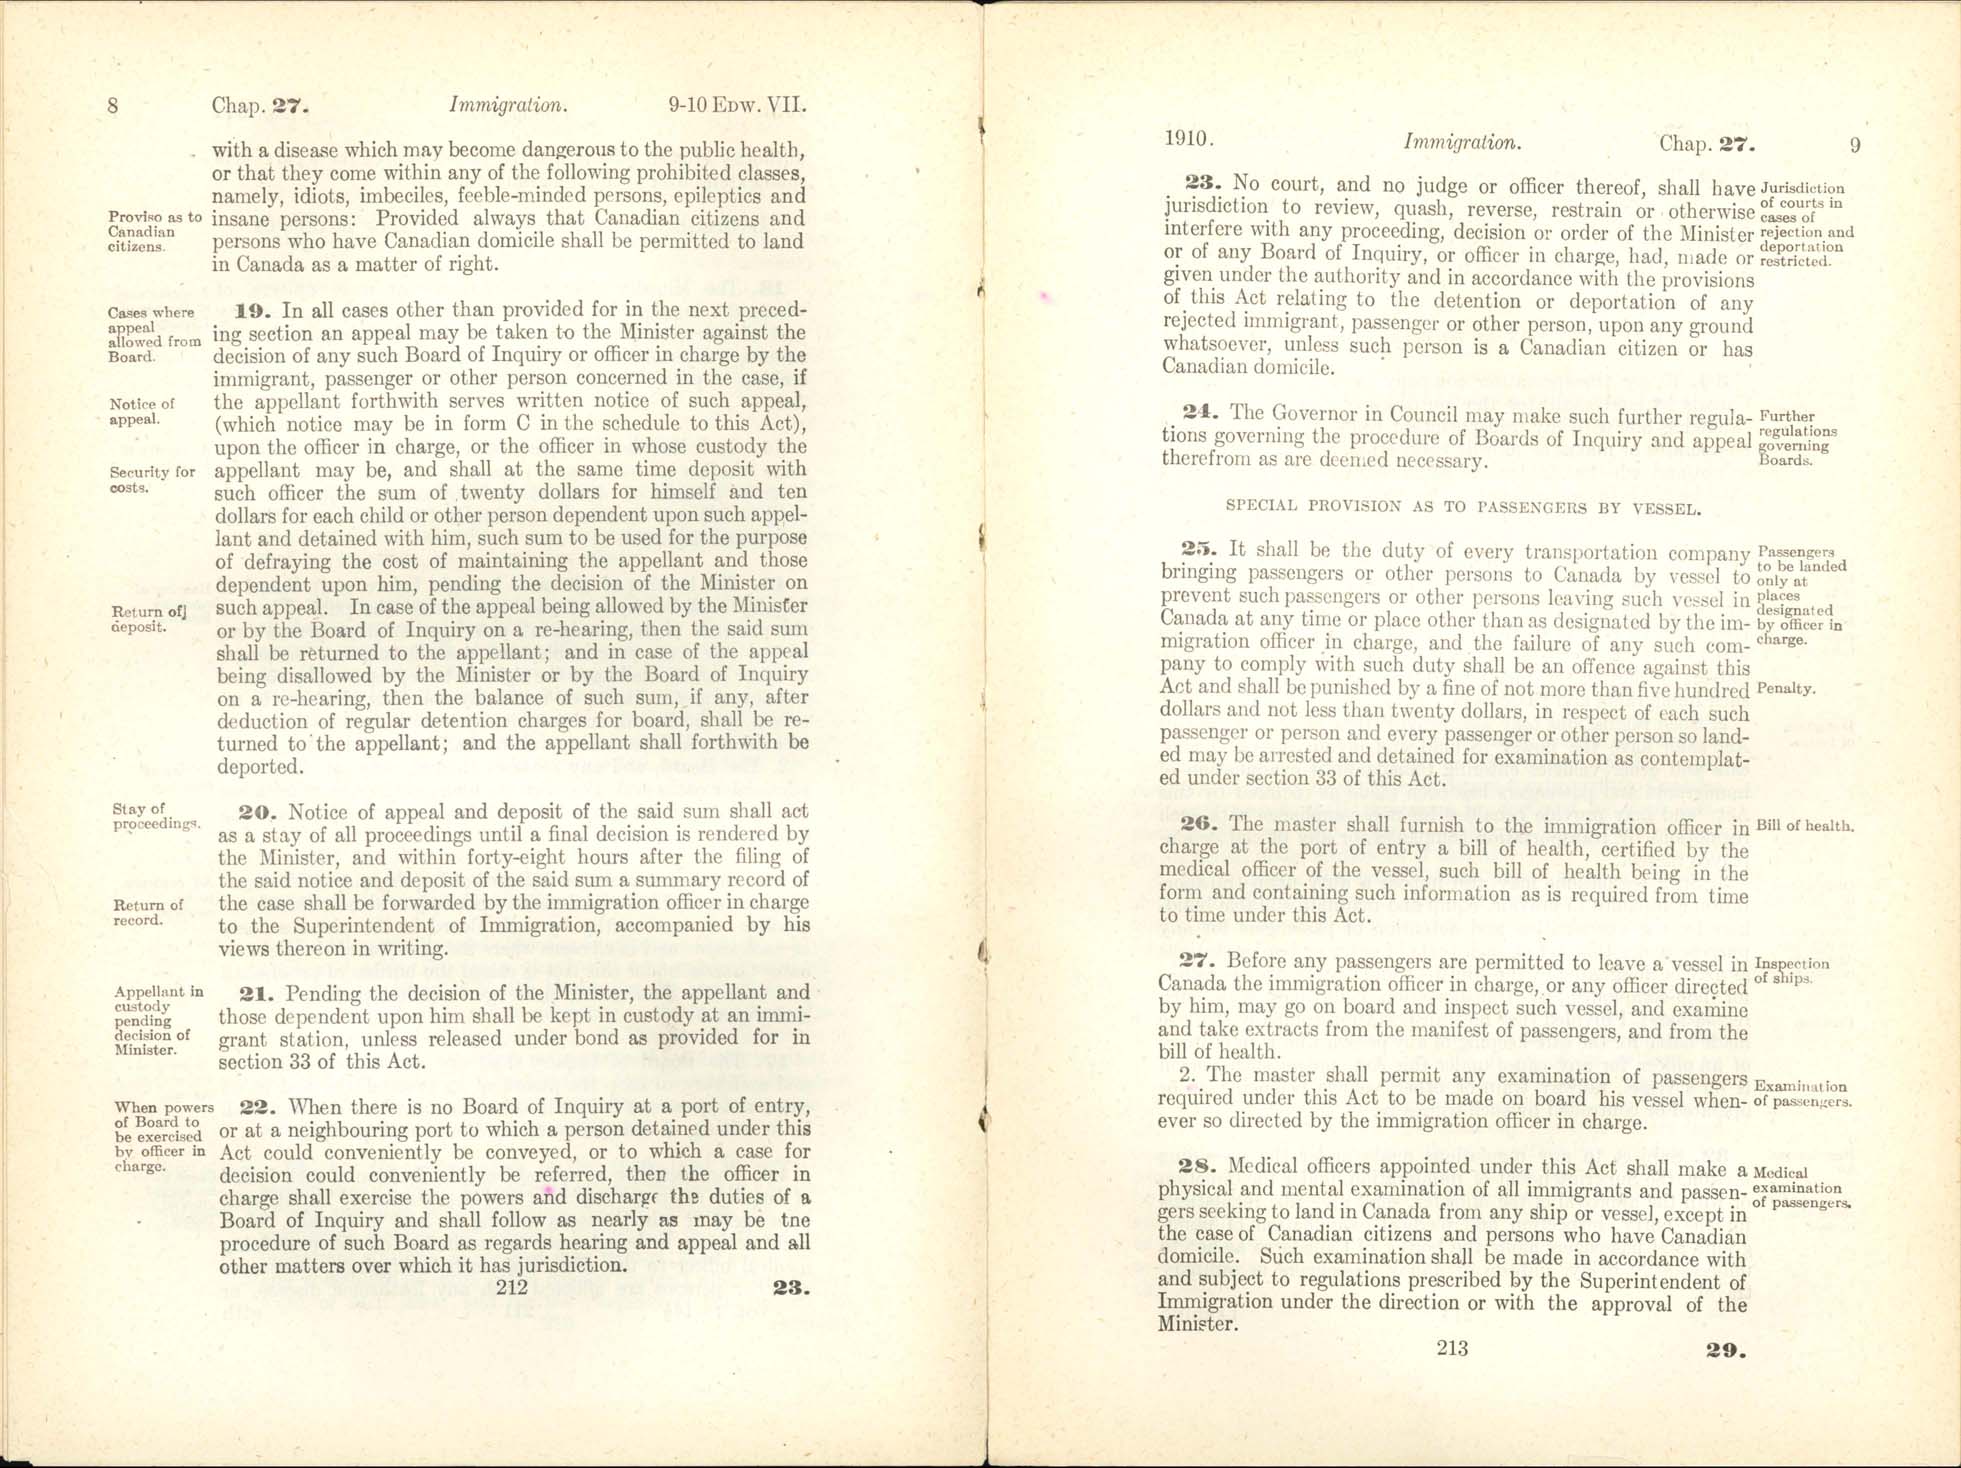 Chap. 27 Page 212, 213 Immigration Act, 1910